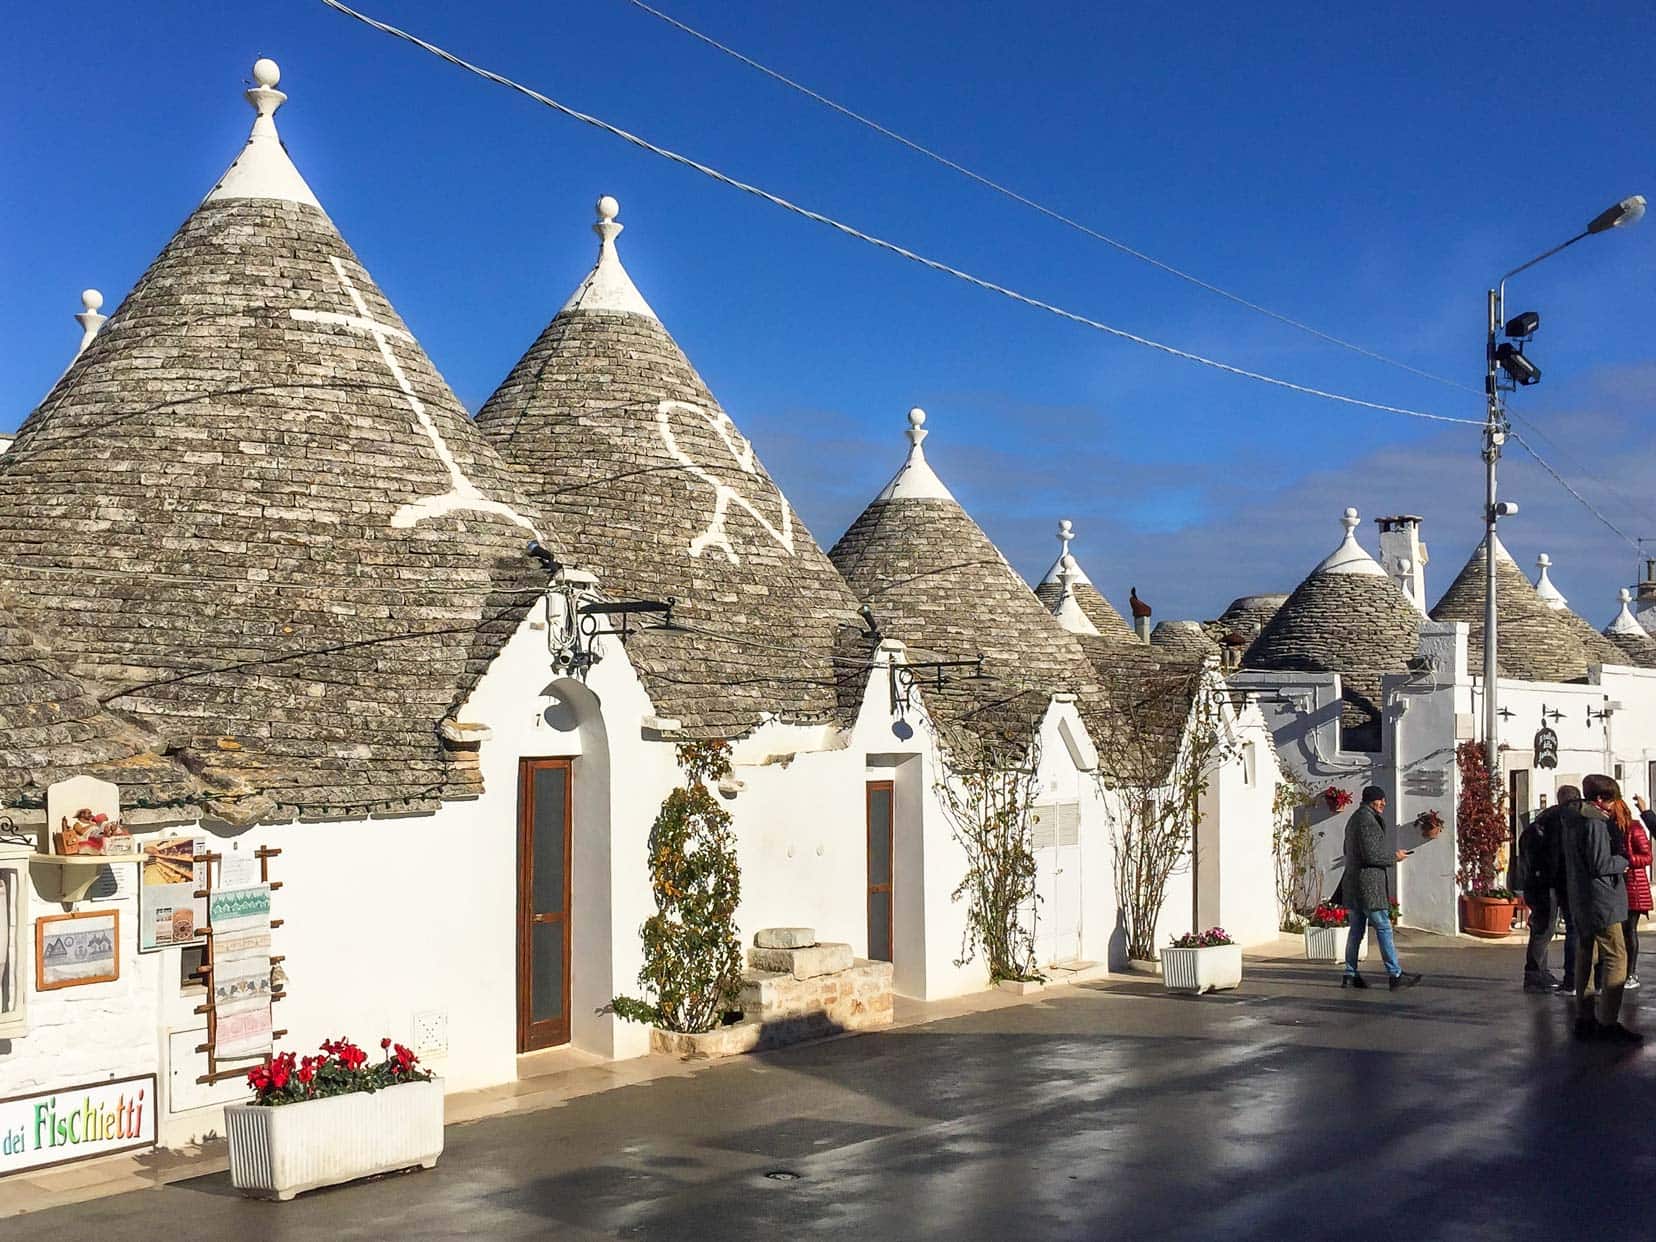 Trulli with white symbols on roof and shop fronts with displayed goods 